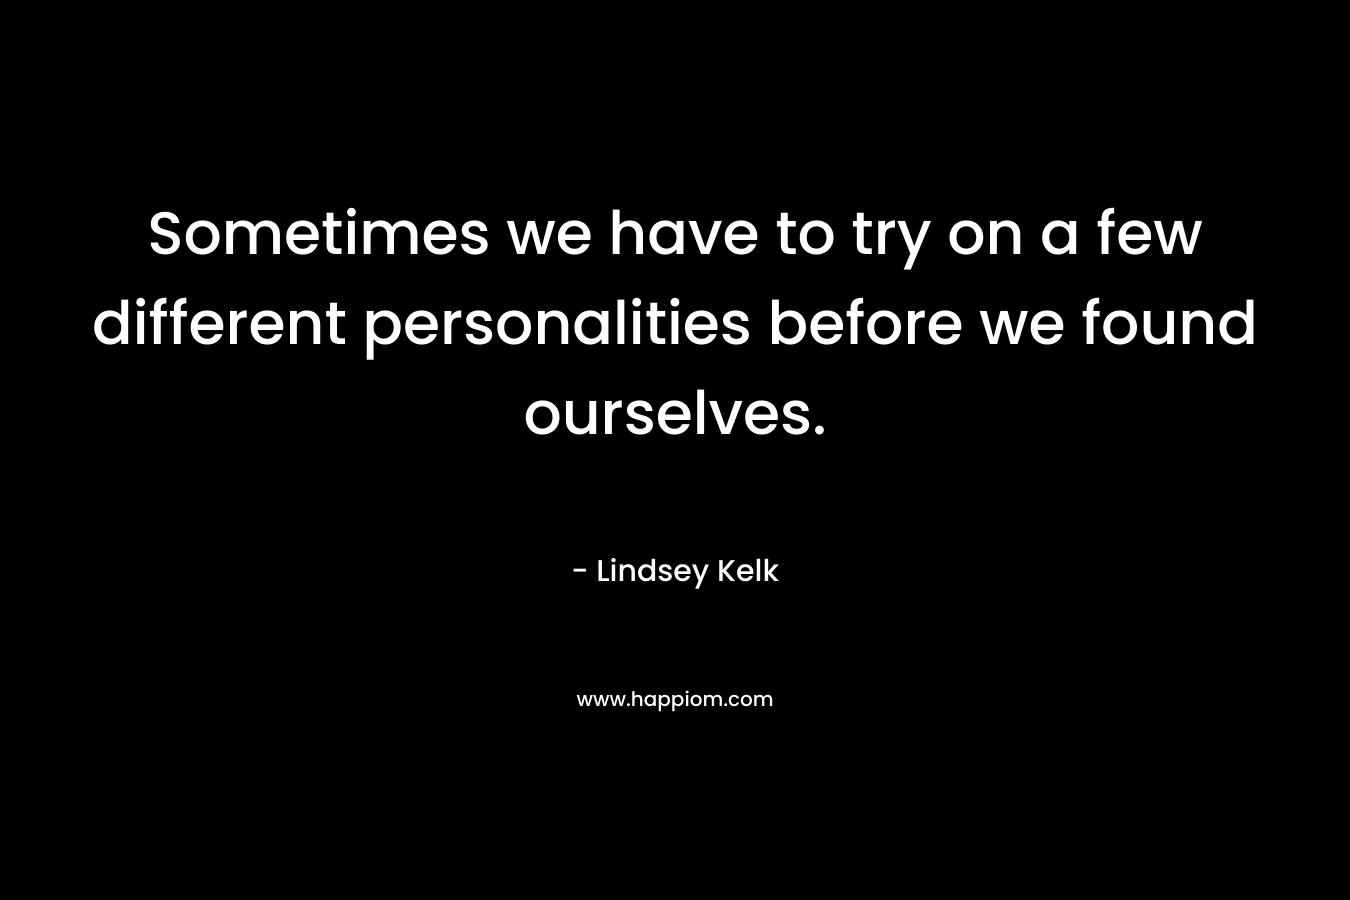 Sometimes we have to try on a few different personalities before we found ourselves. – Lindsey Kelk